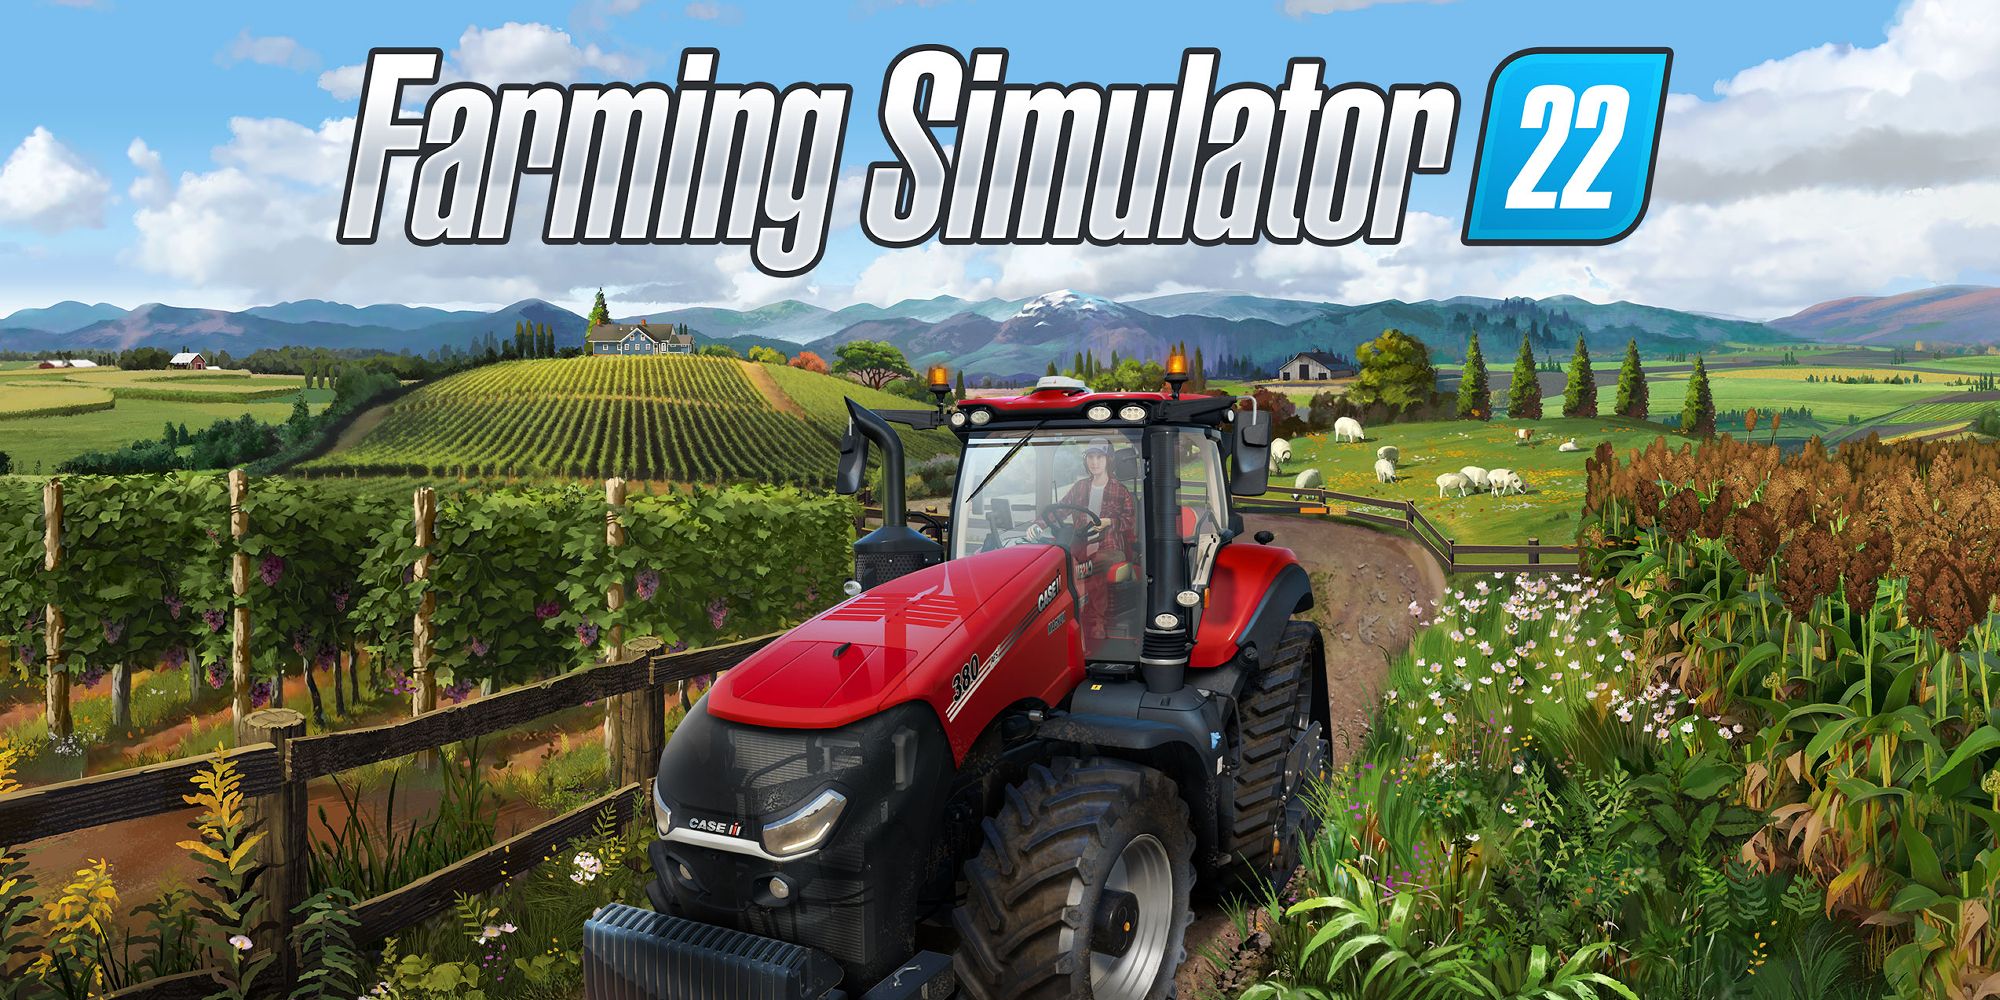 Farming Simulator 22 Title Art With Farmlands And Tractor